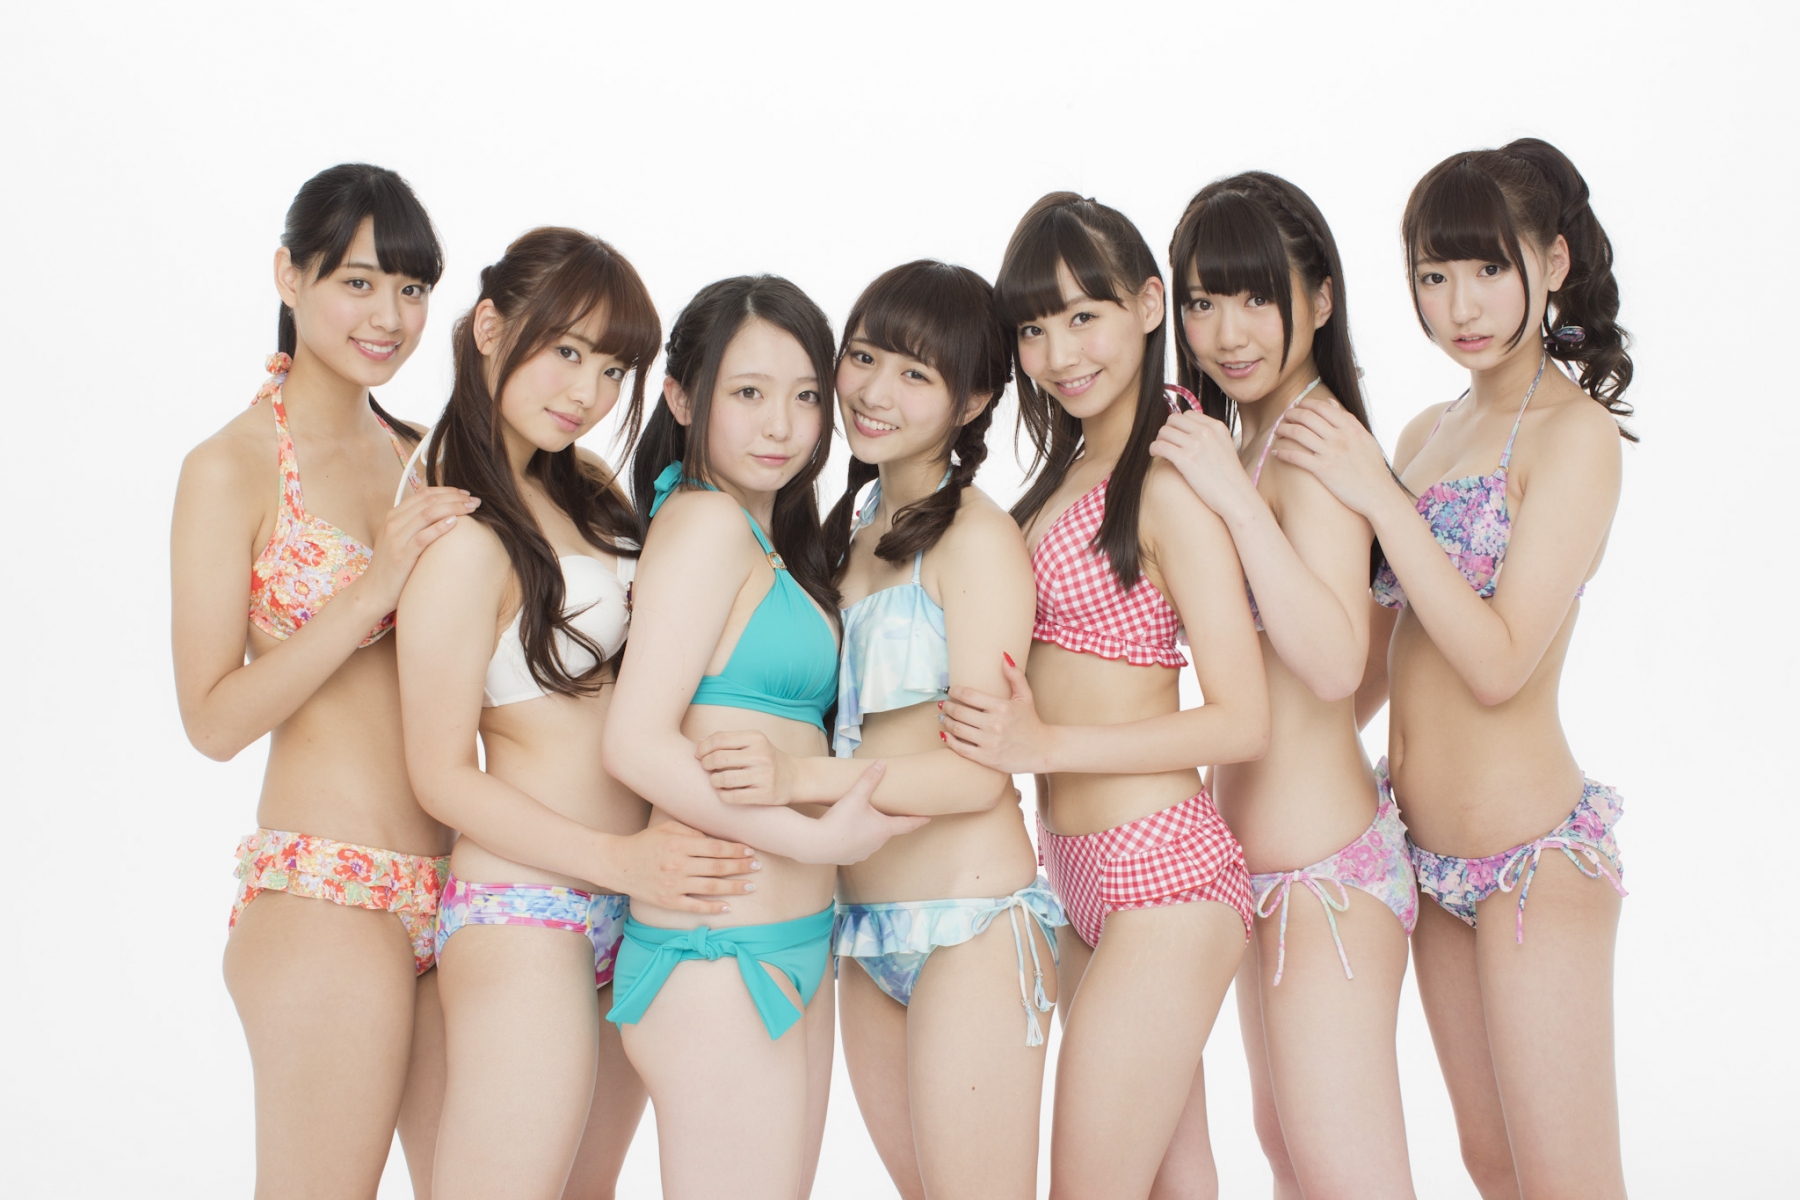 palet to release Music Cards for “VICTORY” in 20 Different Types including Bikini Shots!